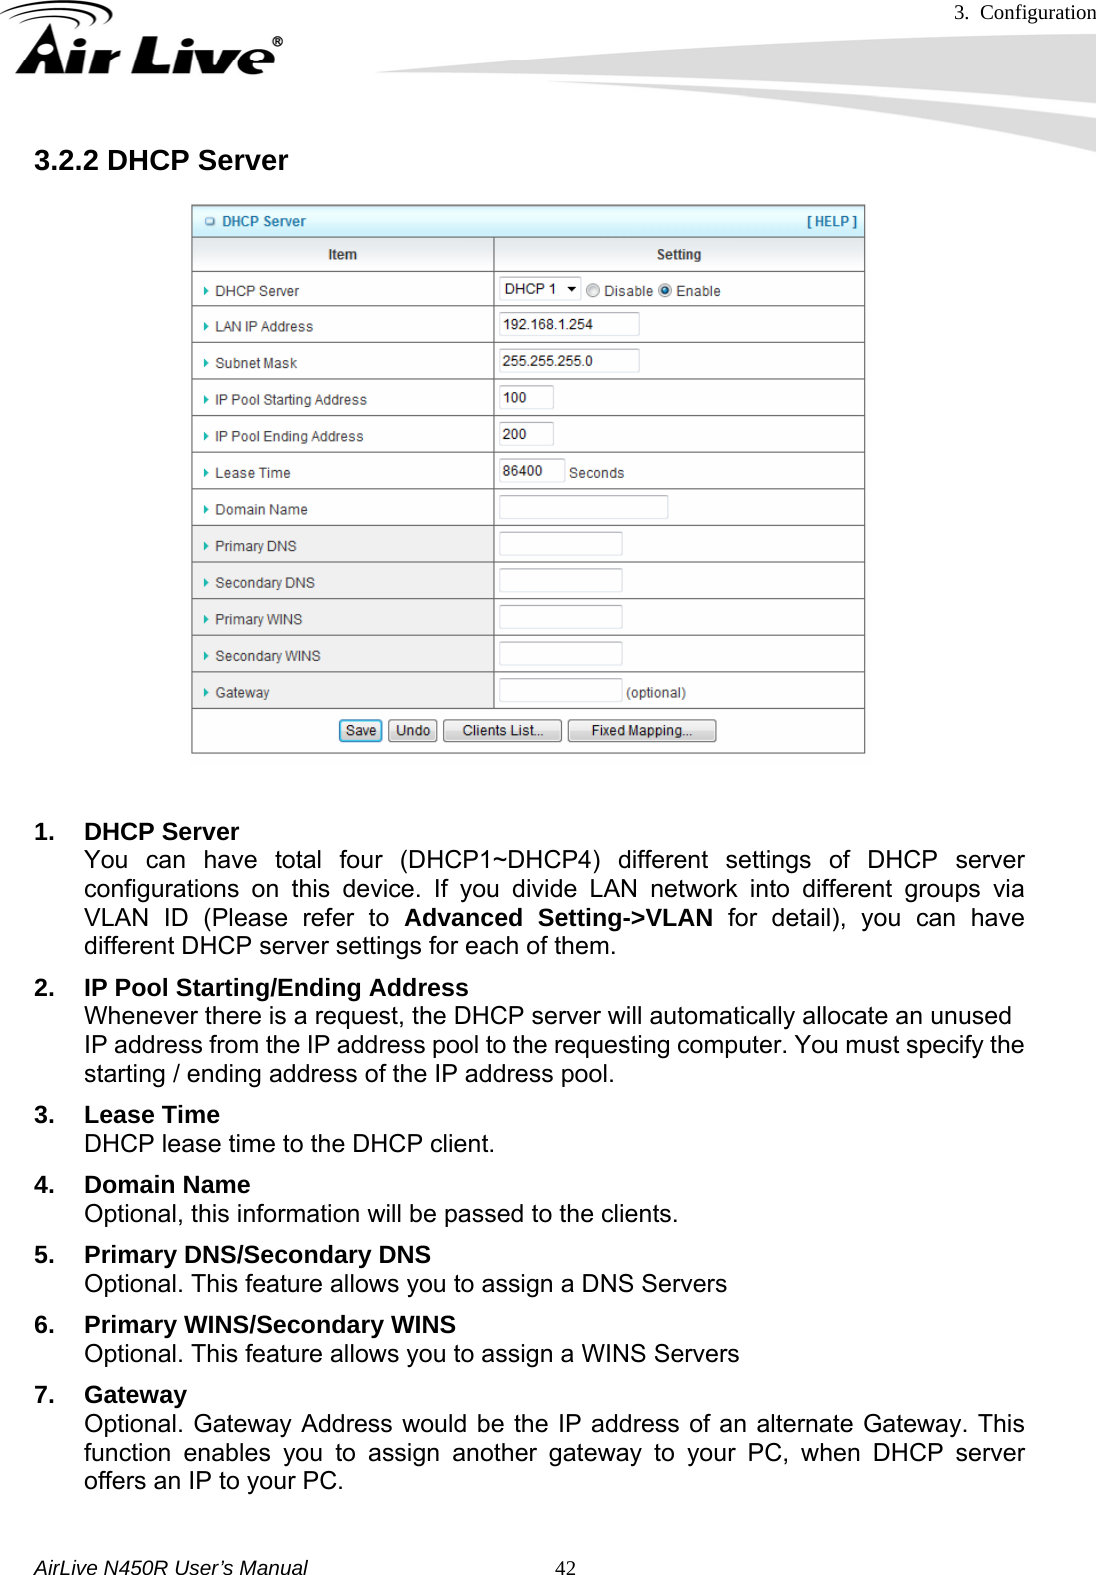 3. Configuration     AirLive N450R User’s Manual   423.2.2 DHCP Server    1. DHCP Server You can have total four (DHCP1~DHCP4) different settings of DHCP server configurations on this device. If you divide LAN network into different groups via VLAN ID (Please refer to Advanced Setting-&gt;VLAN for detail), you can have different DHCP server settings for each of them. 2.  IP Pool Starting/Ending Address Whenever there is a request, the DHCP server will automatically allocate an unused IP address from the IP address pool to the requesting computer. You must specify the starting / ending address of the IP address pool. 3. Lease Time DHCP lease time to the DHCP client. 4. Domain Name Optional, this information will be passed to the clients. 5.  Primary DNS/Secondary DNS Optional. This feature allows you to assign a DNS Servers 6.  Primary WINS/Secondary WINS Optional. This feature allows you to assign a WINS Servers 7. Gateway Optional. Gateway Address would be the IP address of an alternate Gateway. This function enables you to assign another gateway to your PC, when DHCP server offers an IP to your PC.  